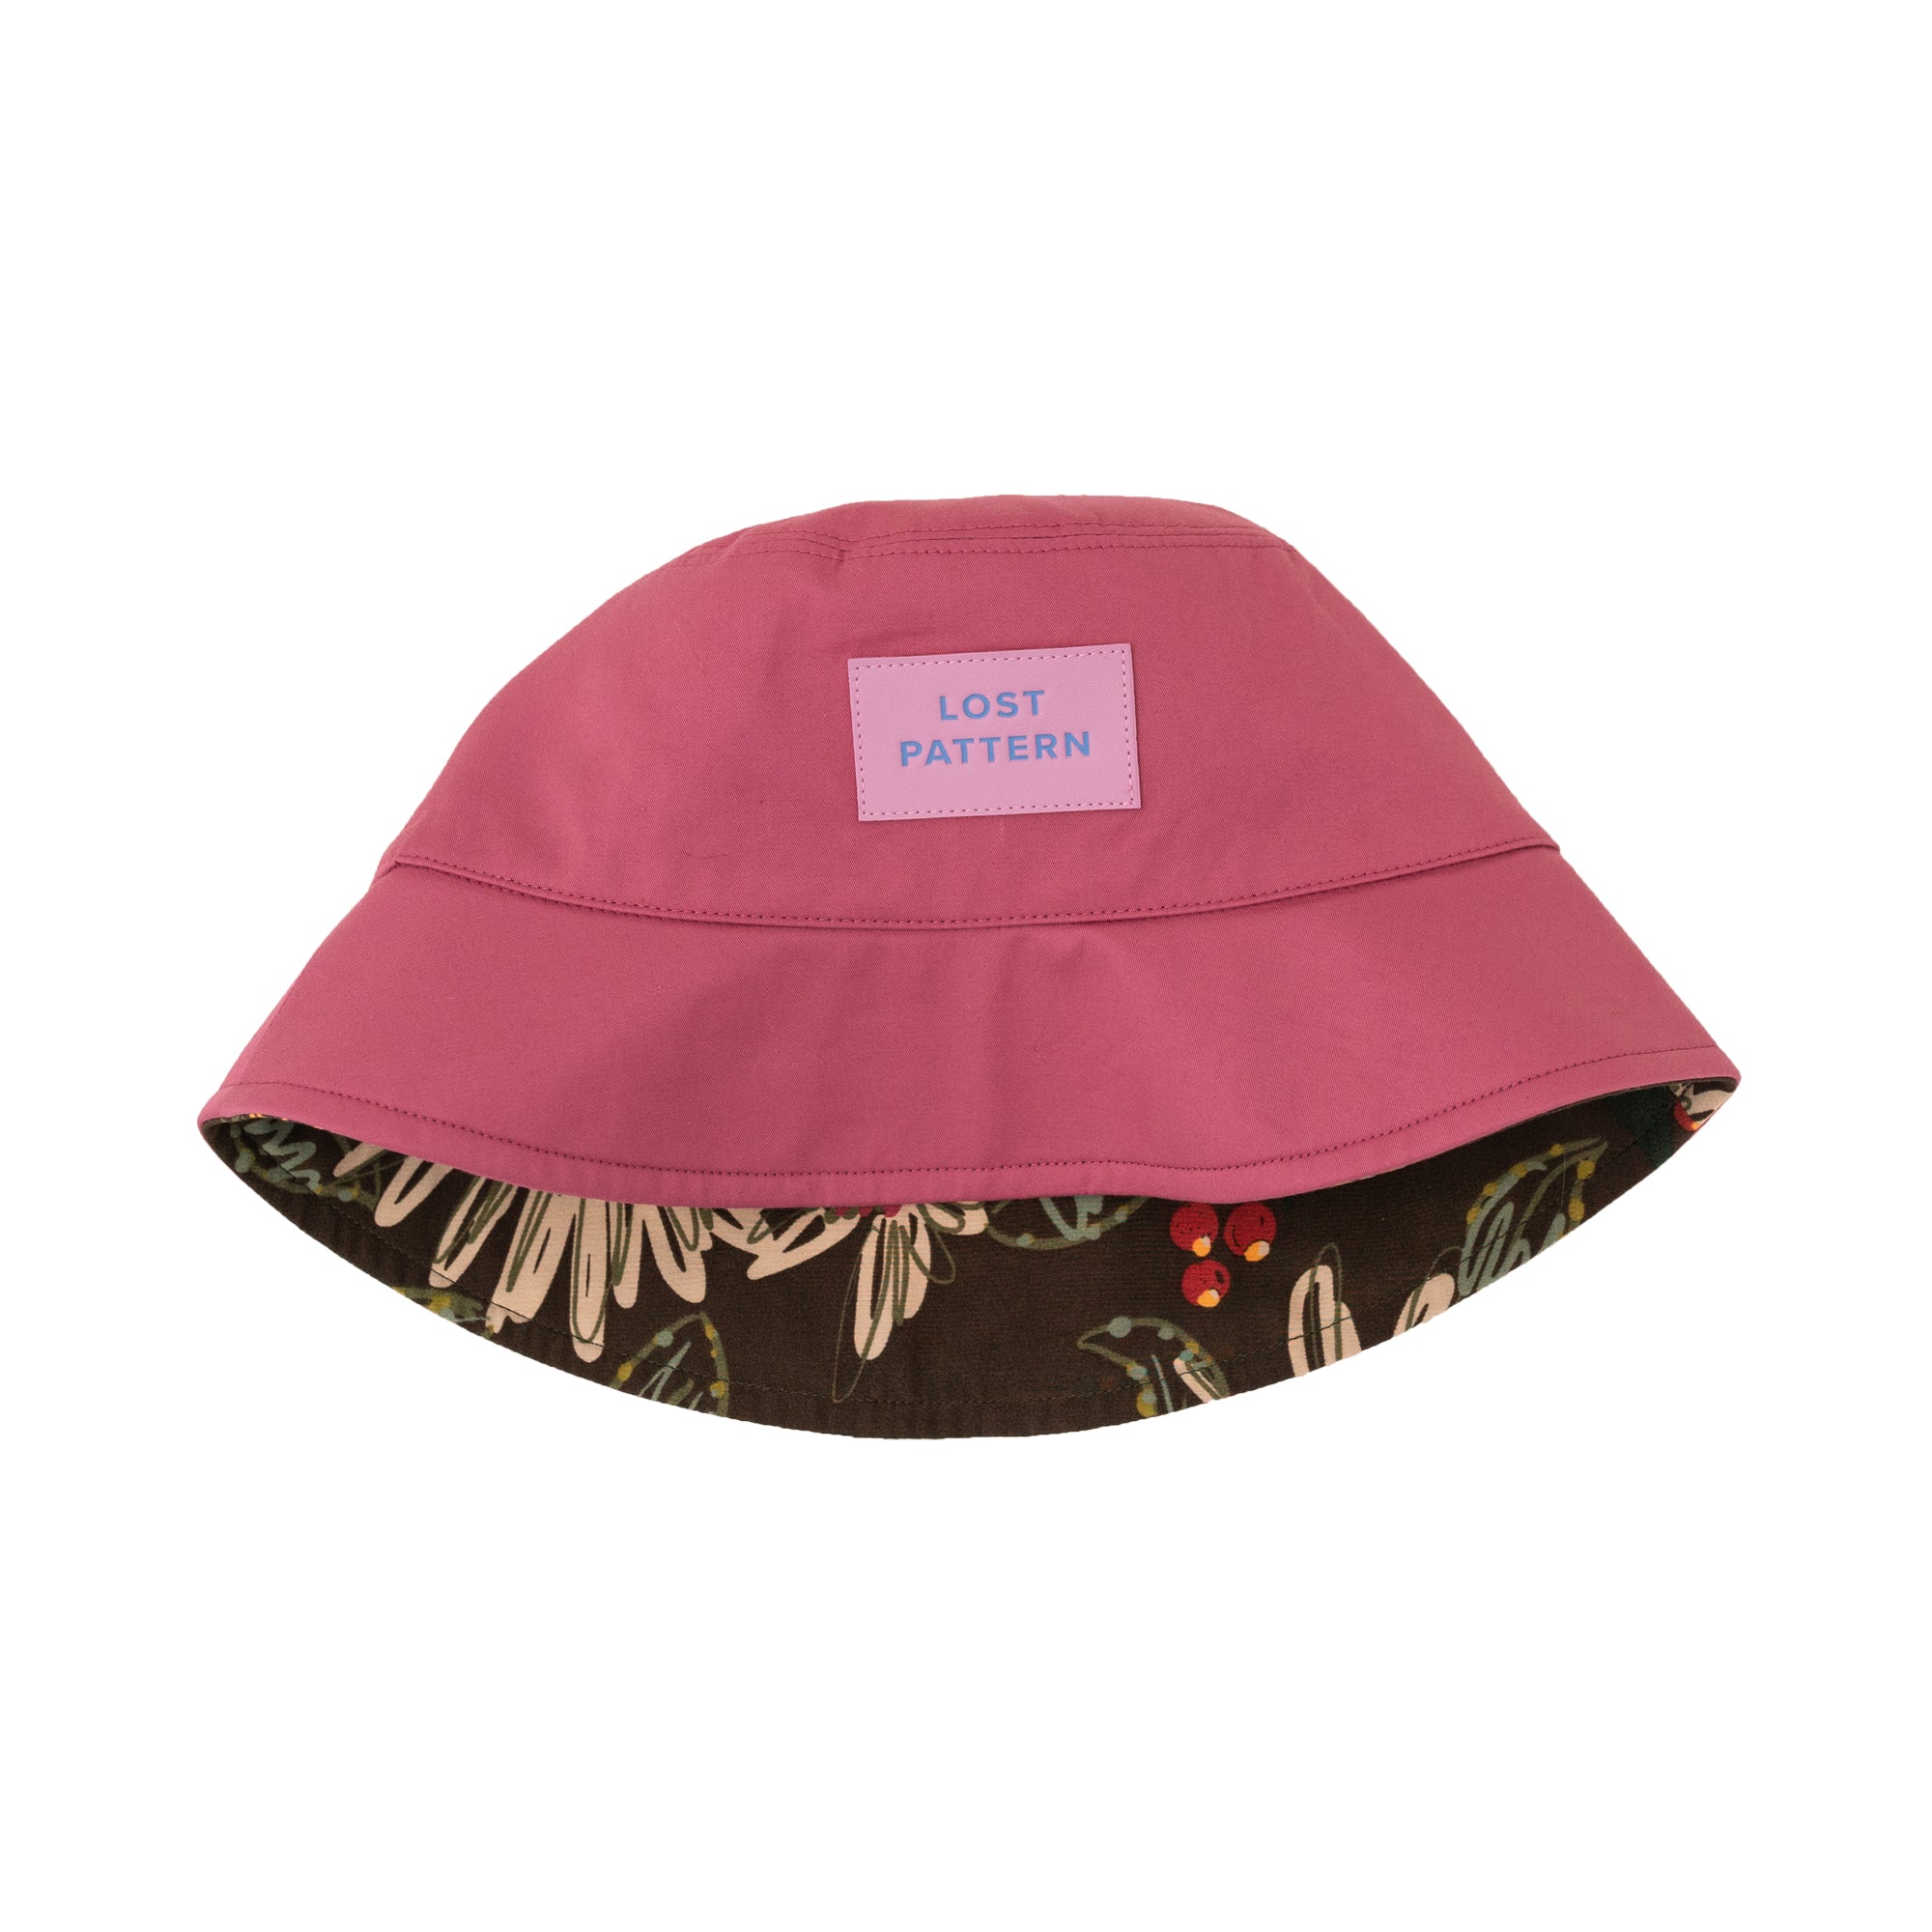 "Forest" Cotton Reversible Bucket Hat - Rose Red - LOST PATTERN Hats